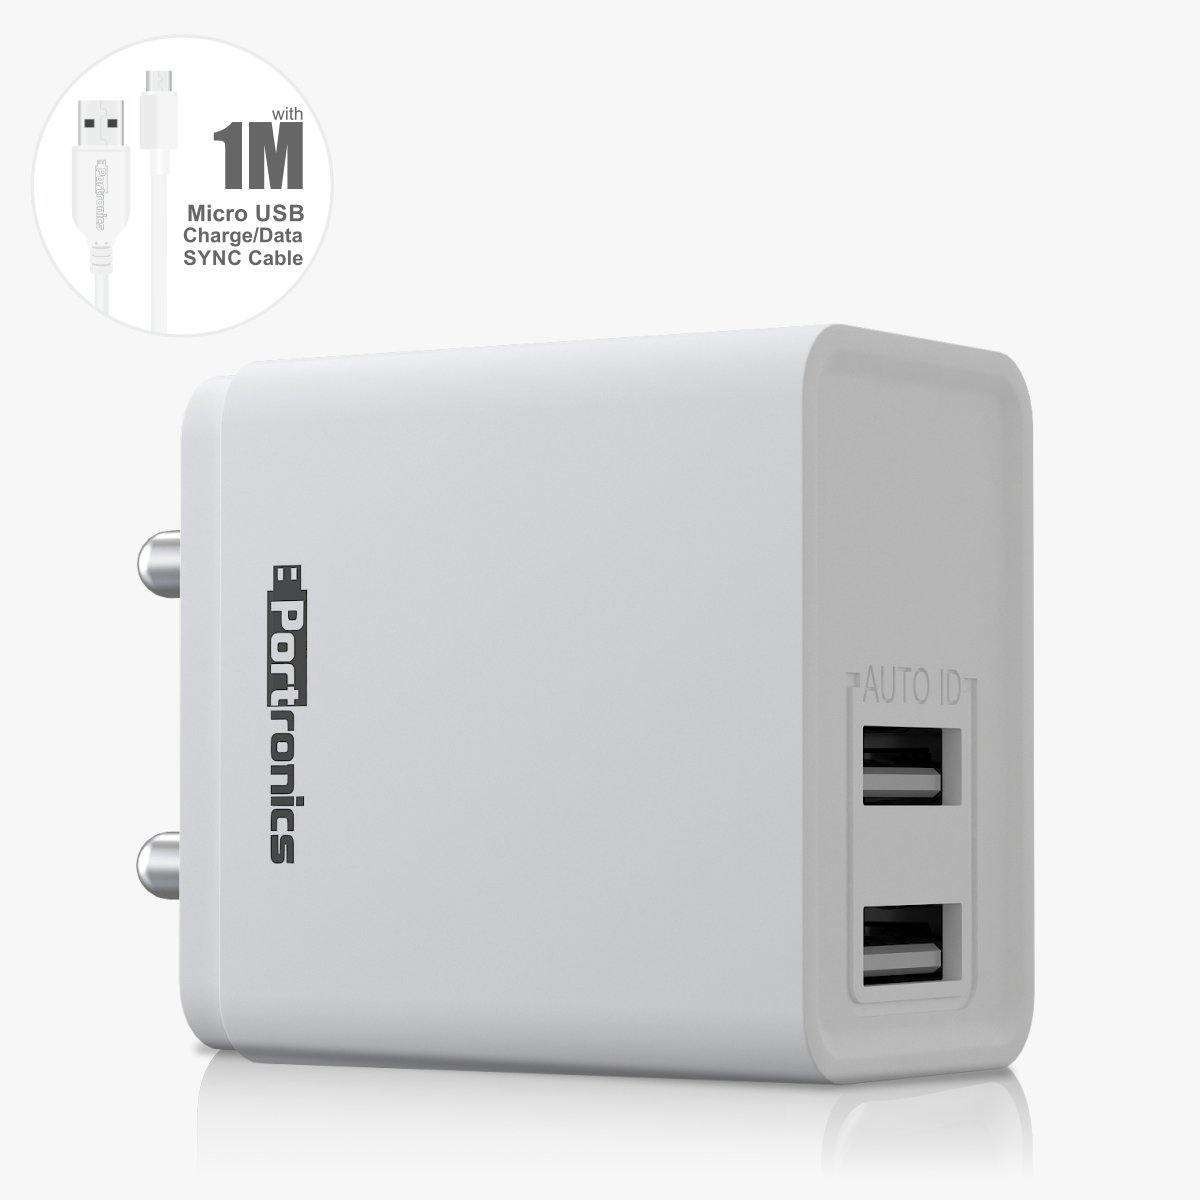 Adapto 648 2.4 A Charger with Dual USB Ports